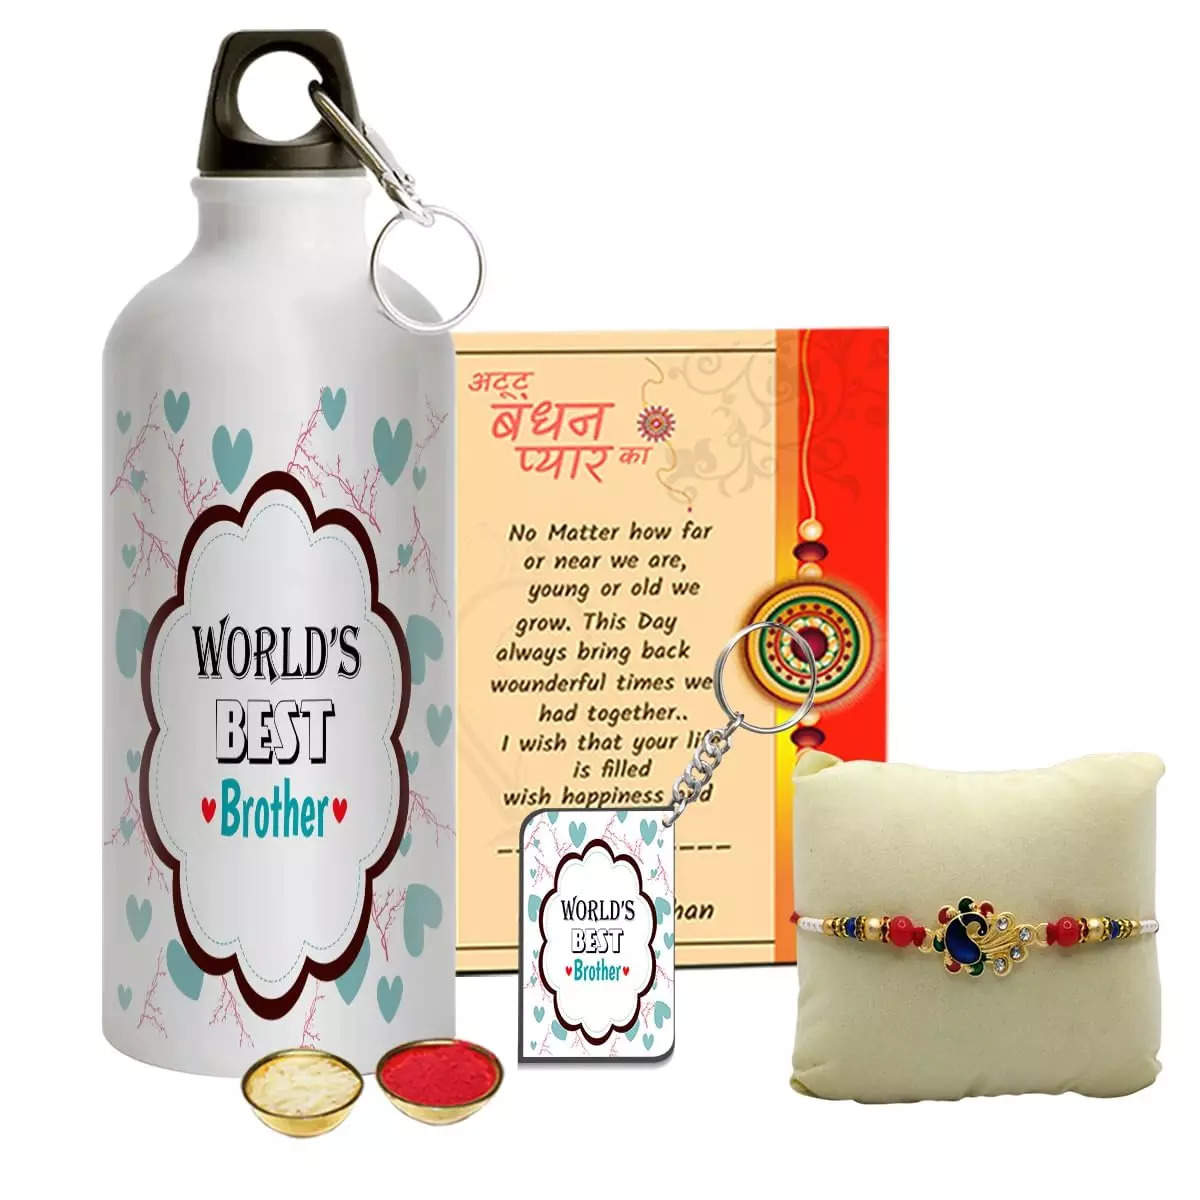 Make Your Married Sister Feel Special by Giving a Decent Rakhi Gift – Rakhi .in